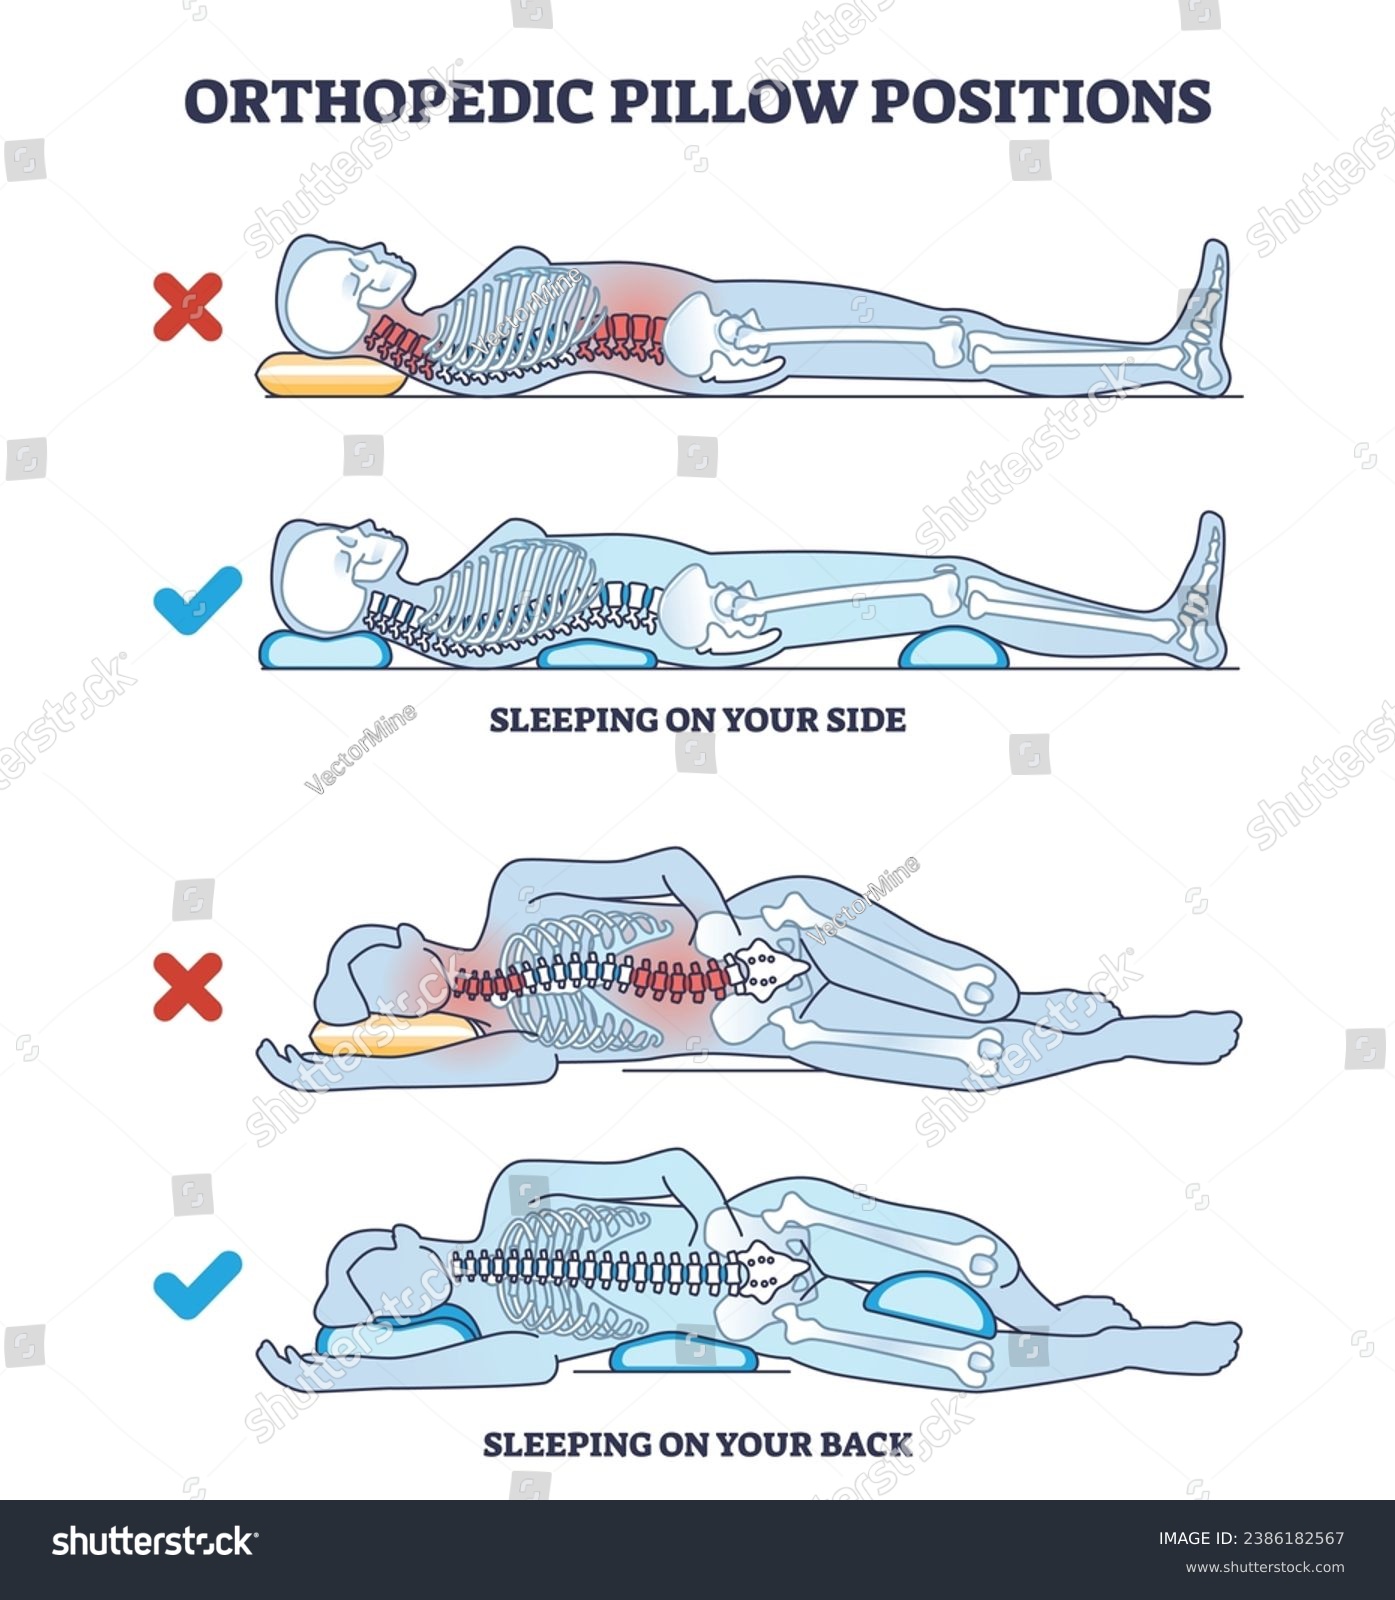 SVG of Orthopedic pillow positions with sleeping on side and back outline diagram. Labeled educational poses with good, correct and healthy example comparison to wrong vector illustration. Curved backbone. svg